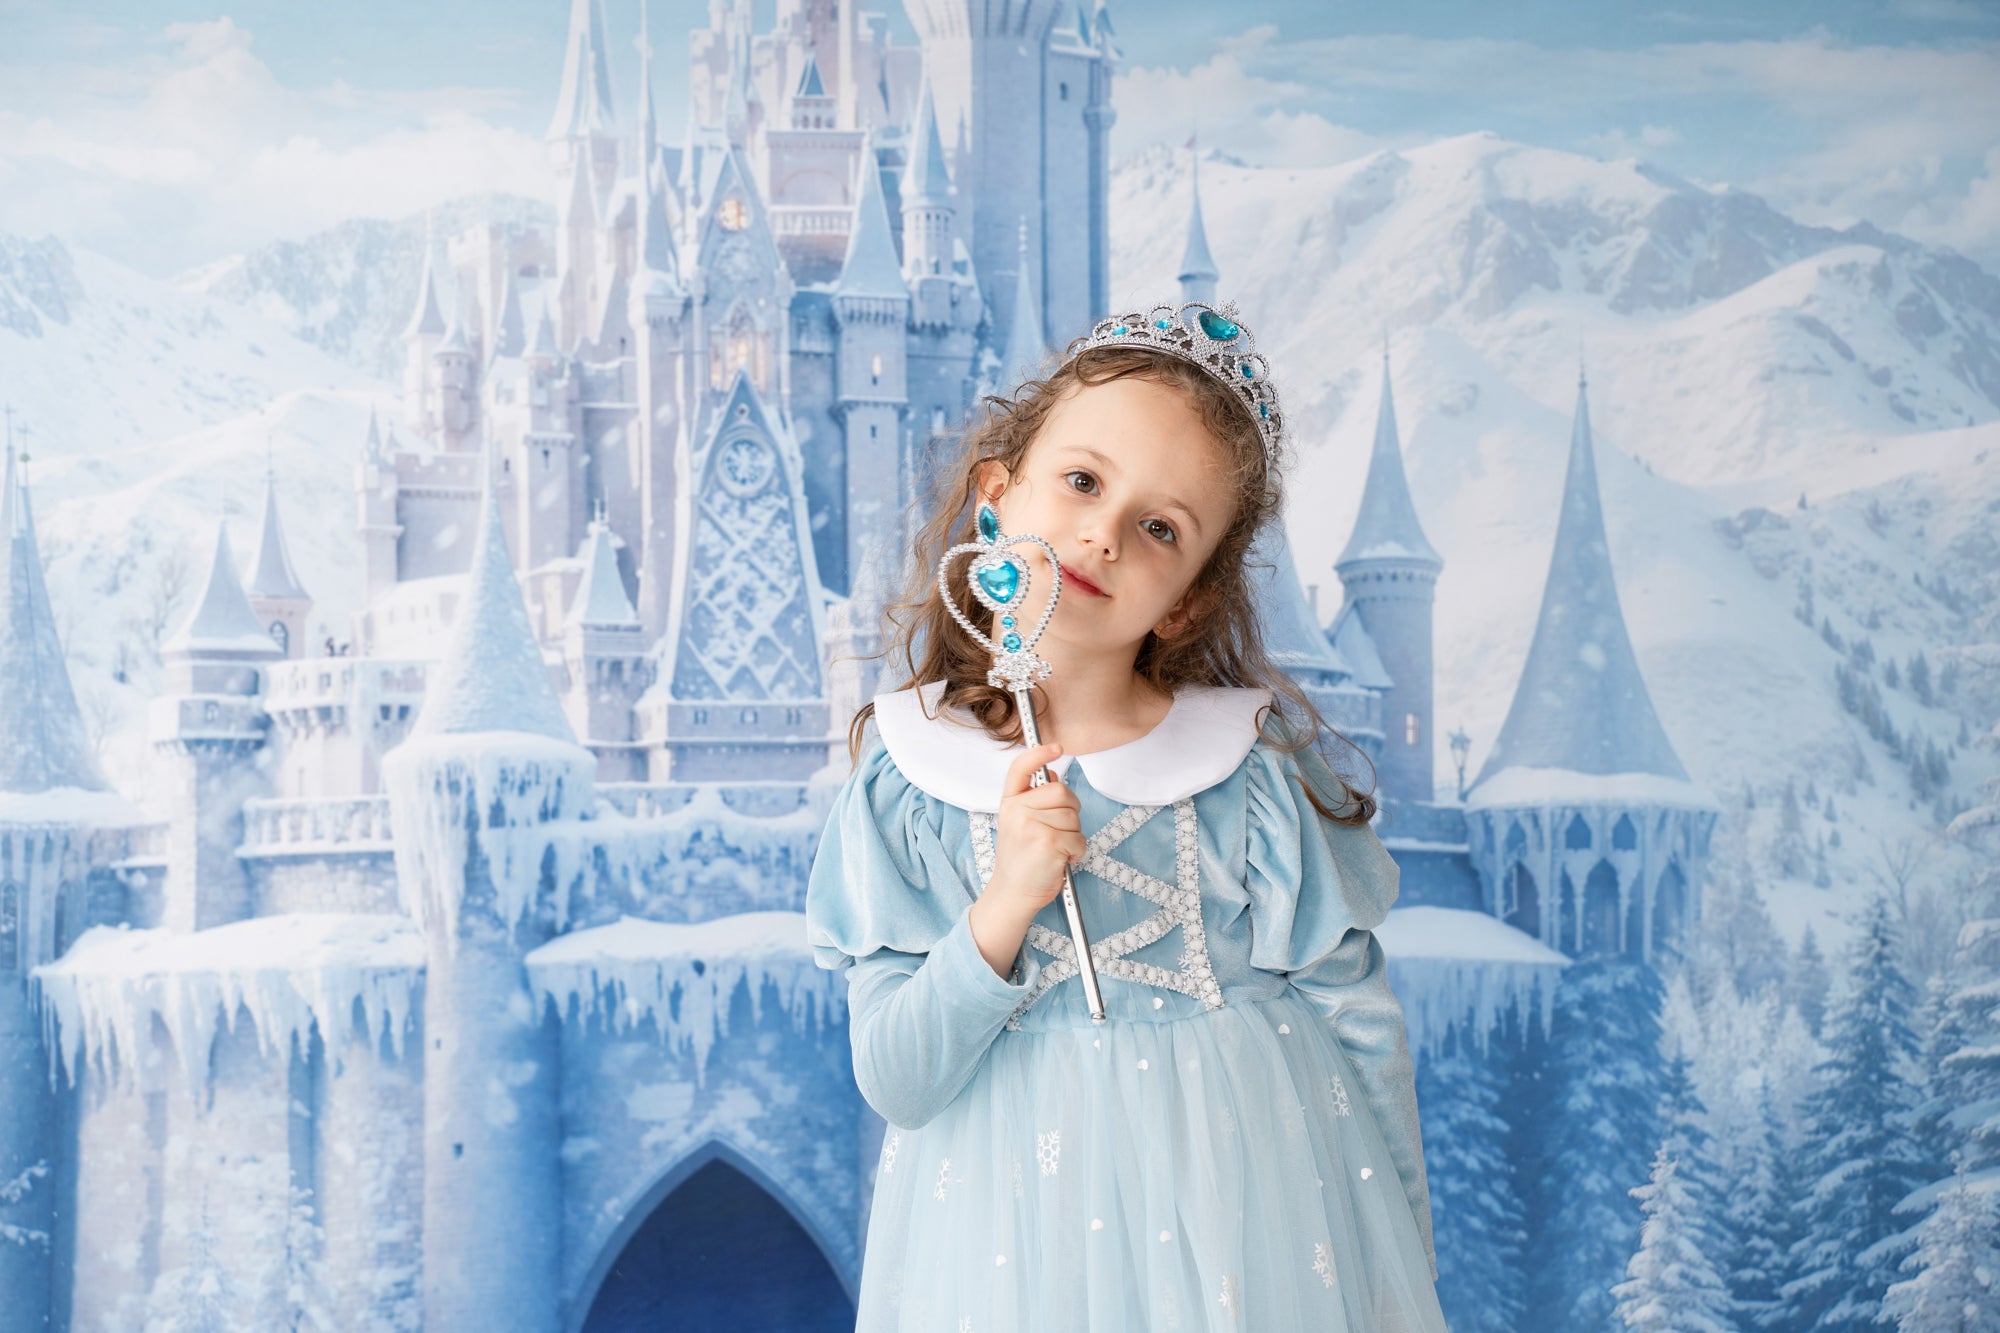 Kate Winter Ice Frosted World Castle Backdrop Designed by Chain Photography